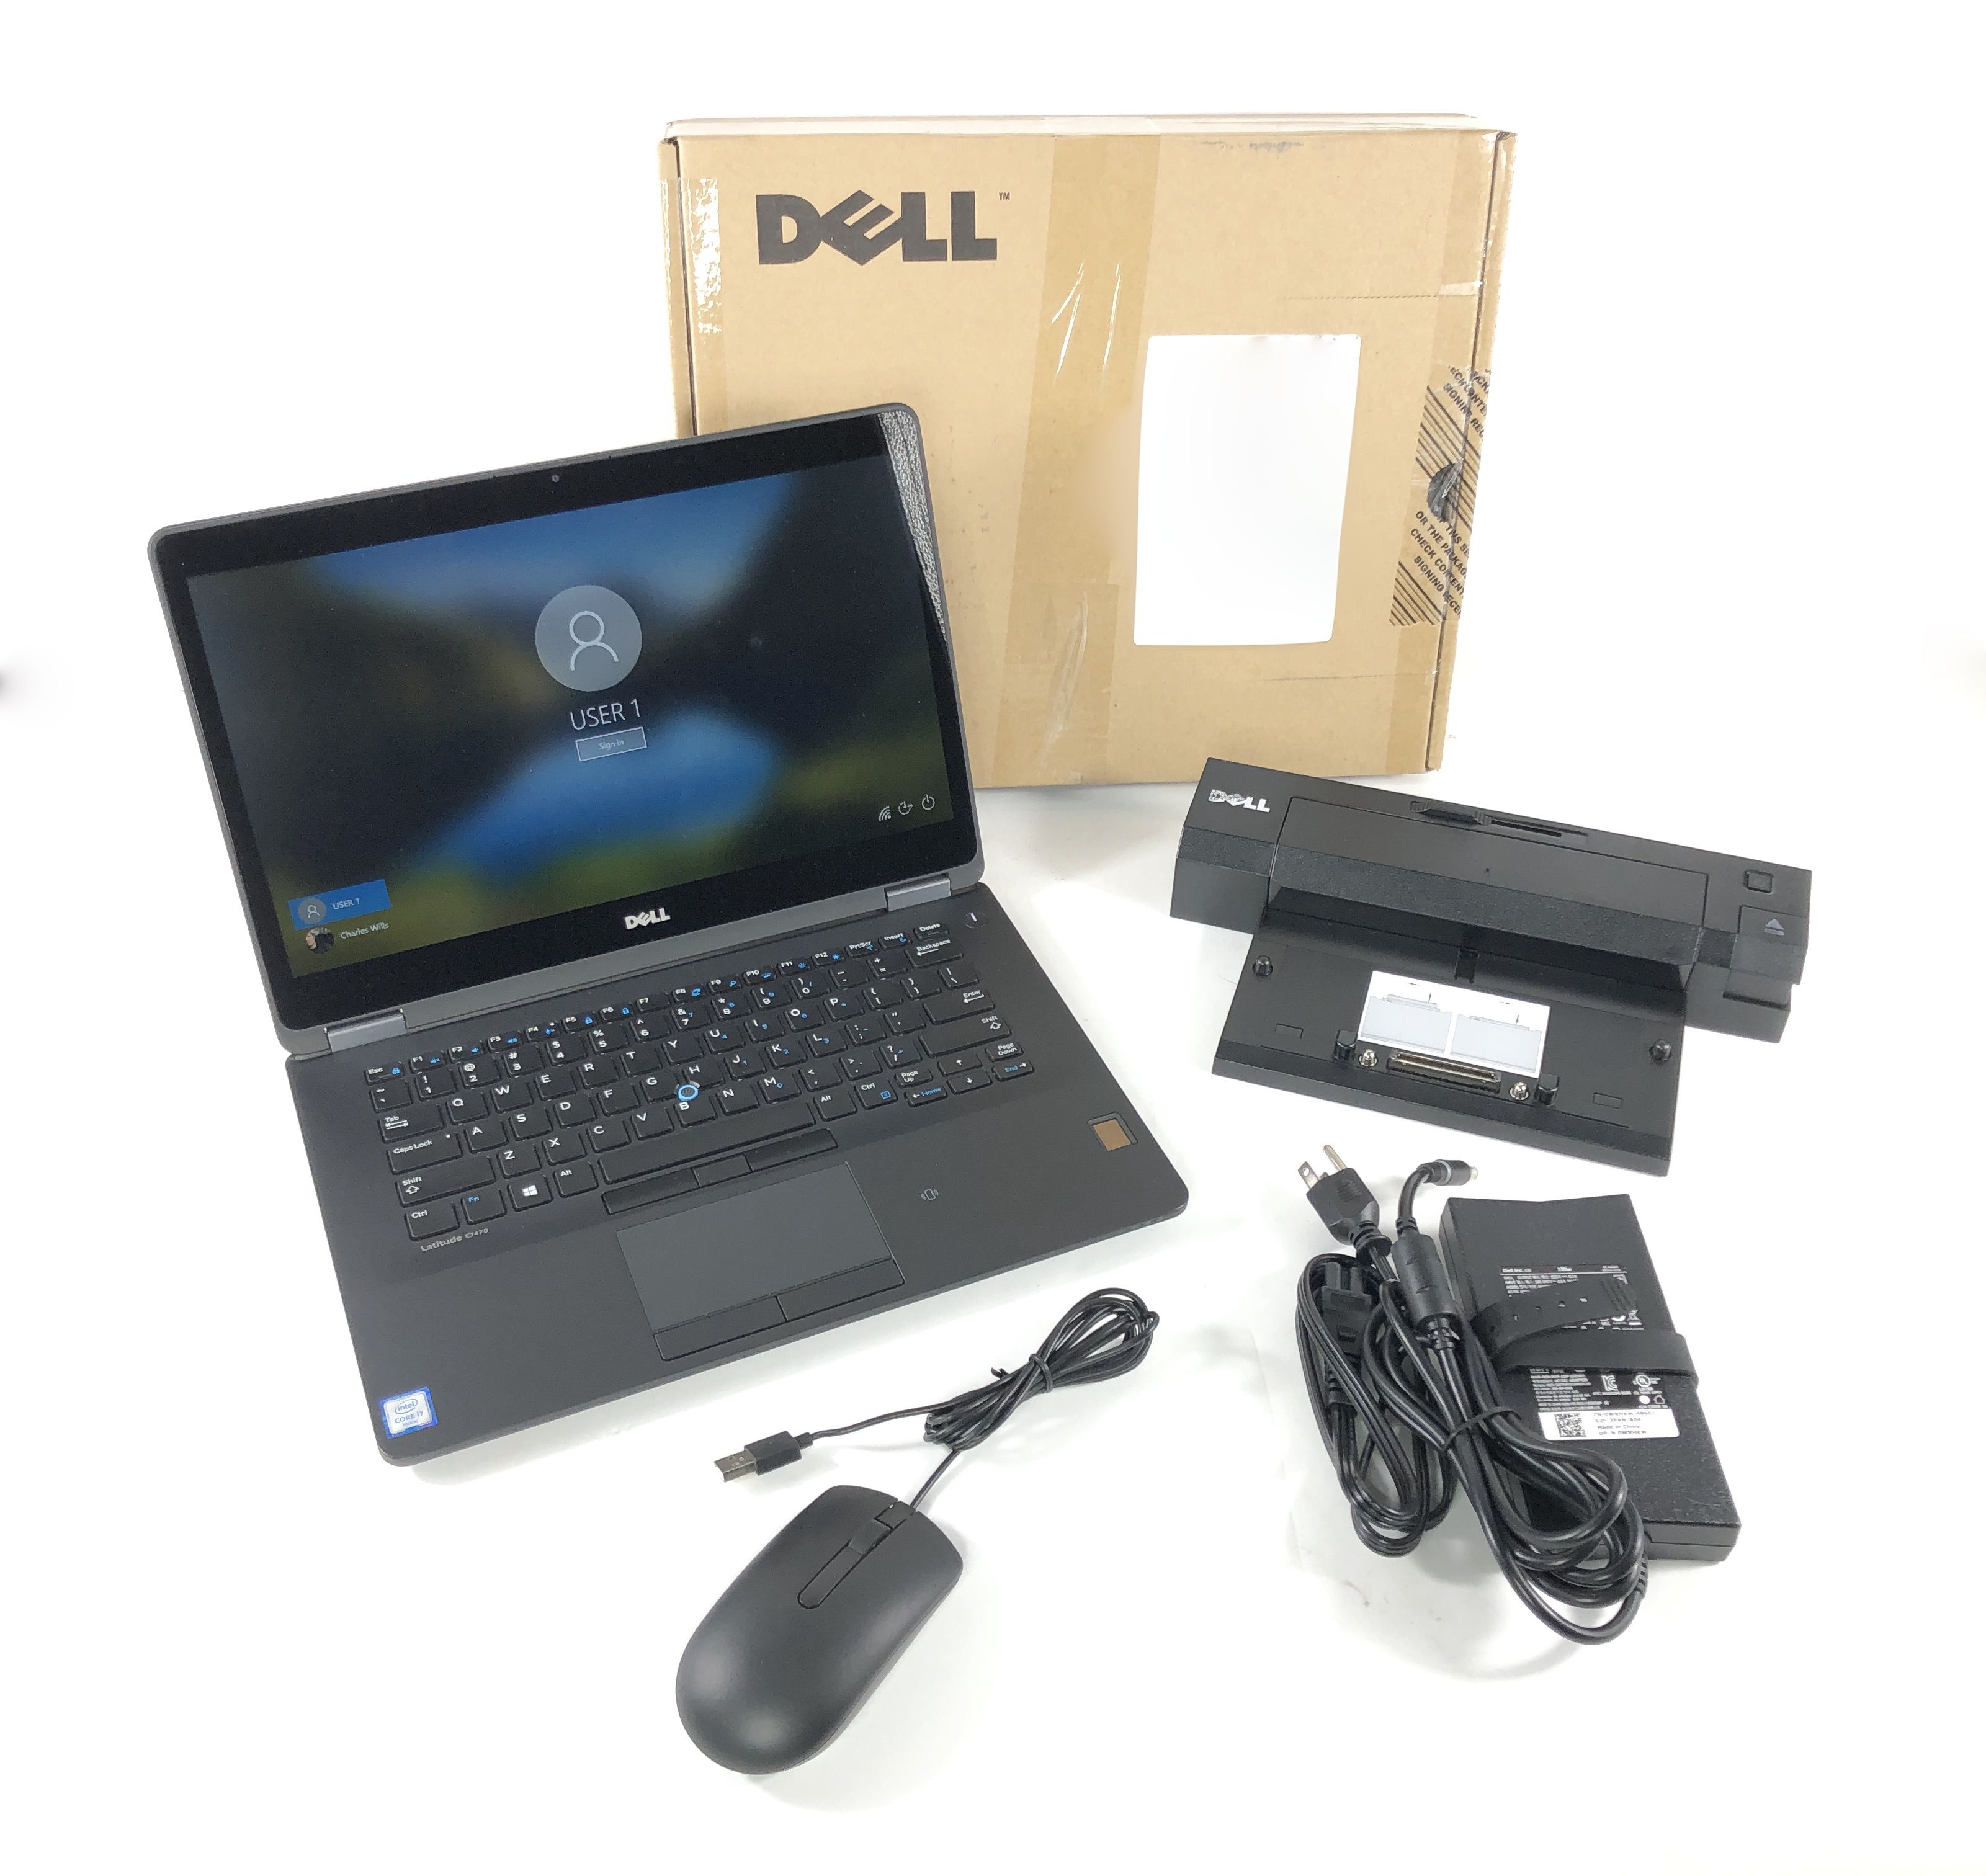 DELL LATITUDE TOUCHSCREEN ULTRABOOK w/ E-Dock and Mouse!!